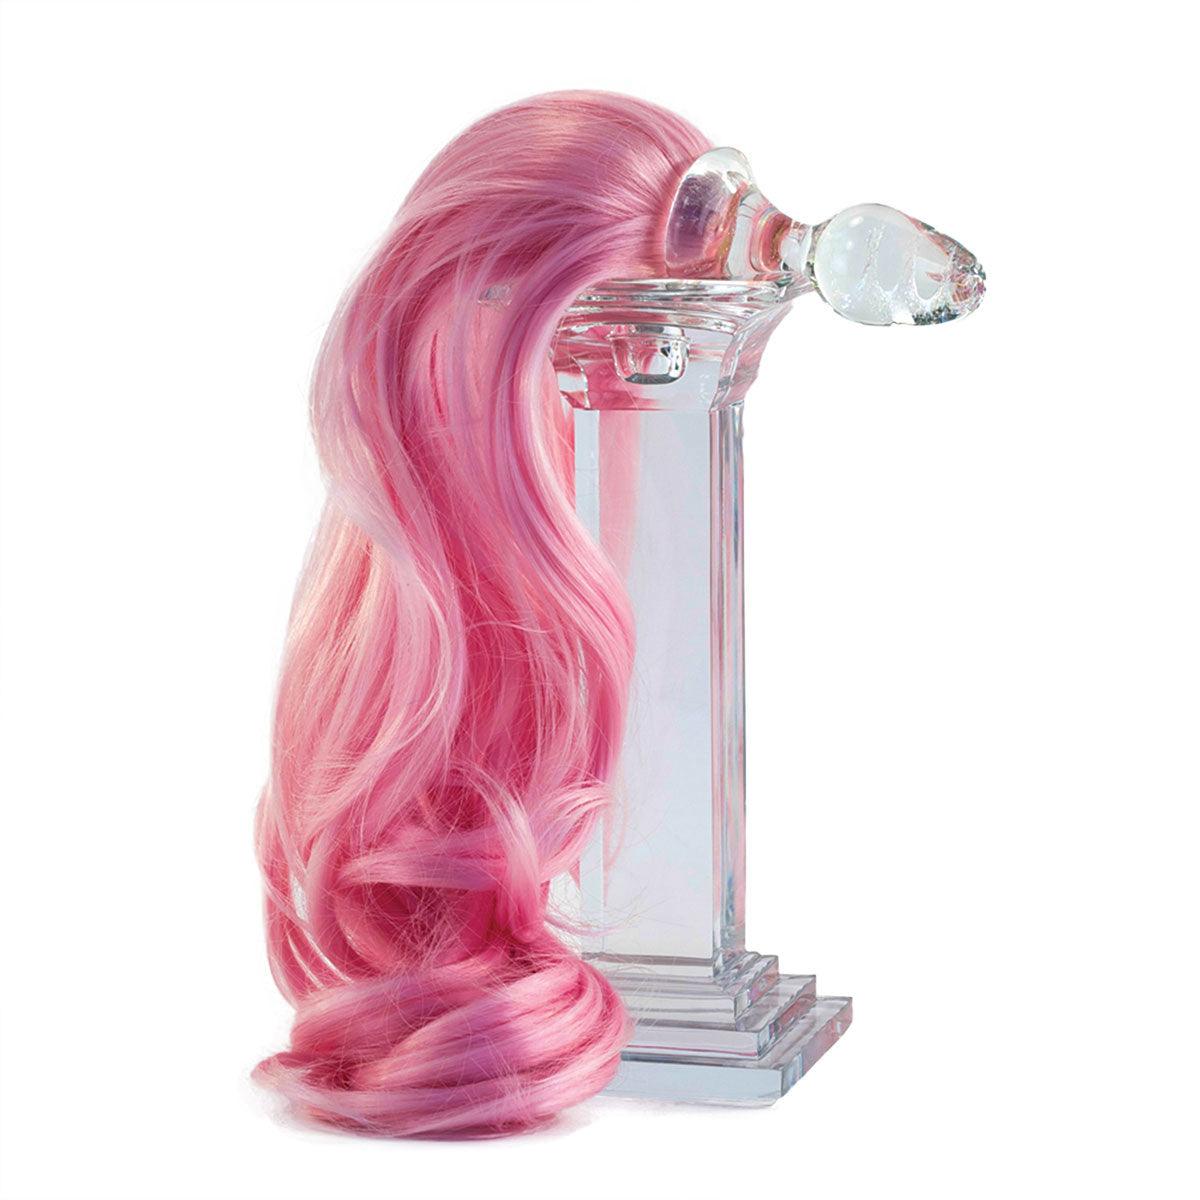 Crystal Delights My Lil Pony Tail - Pink - shop enby